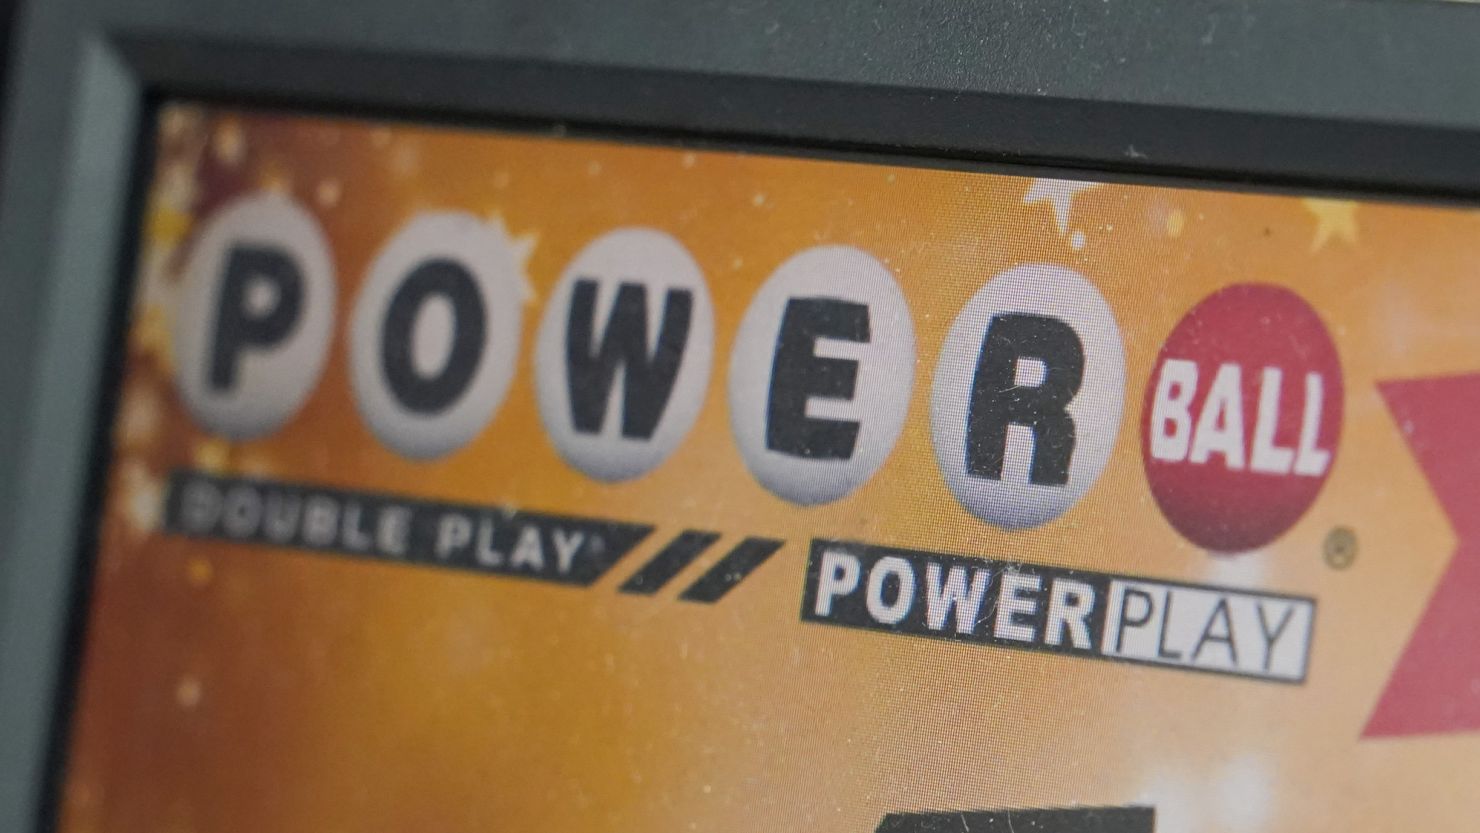 Twenty-nine consecutive Powerball drawings have passed without a jackpot winner.